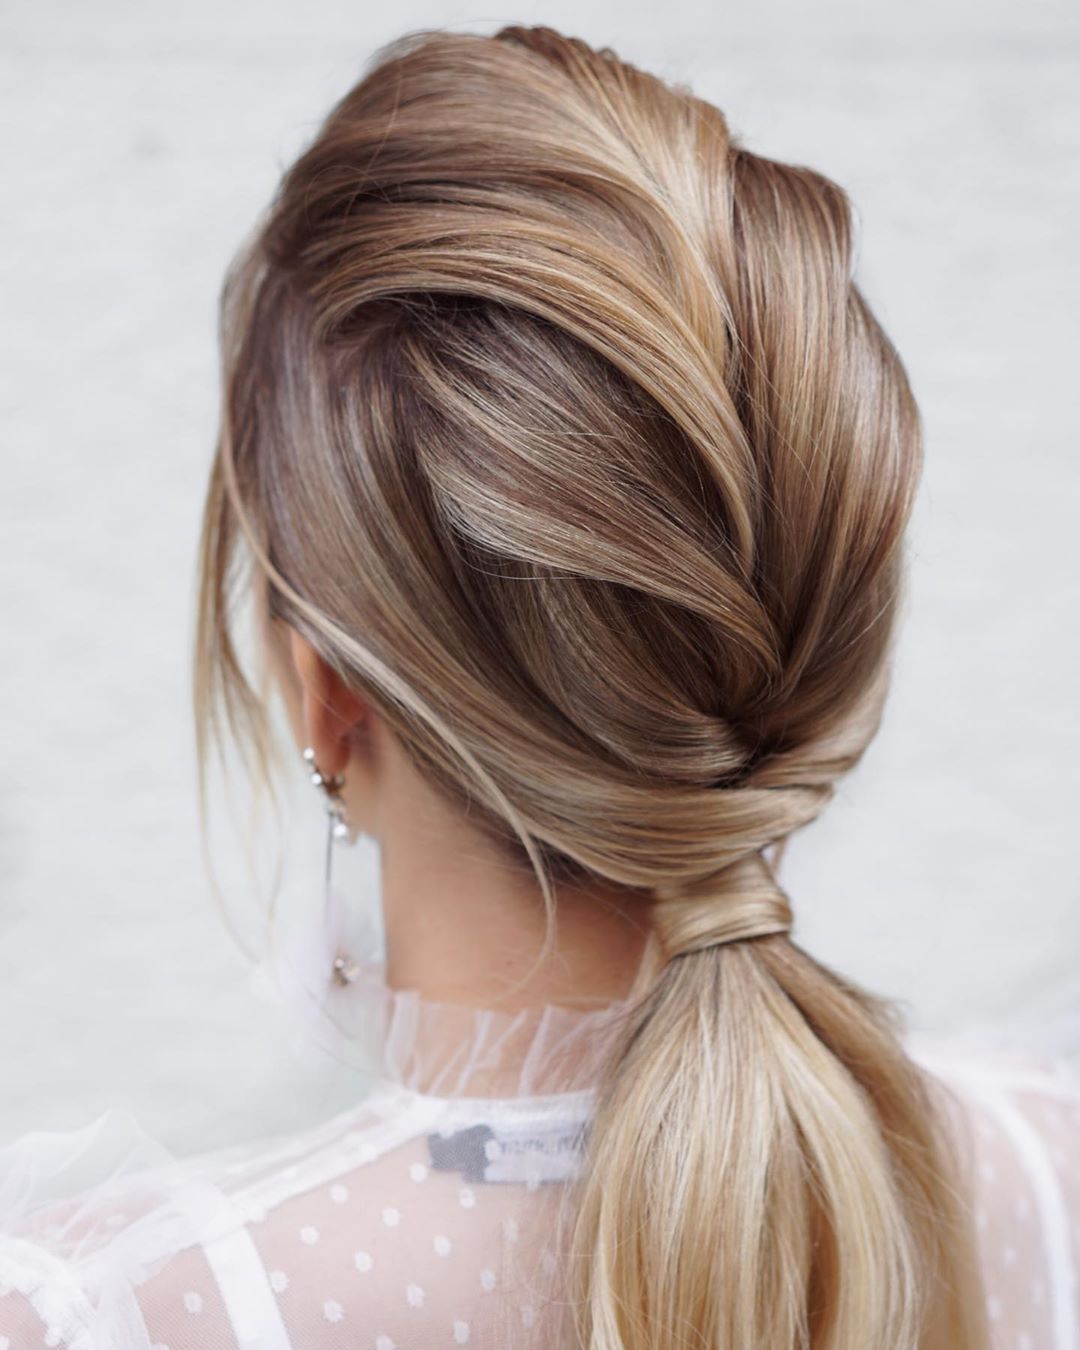 Pretty Ponytail Hairstyle for Long Hair - Ponytail Long Hairstyle Ideas